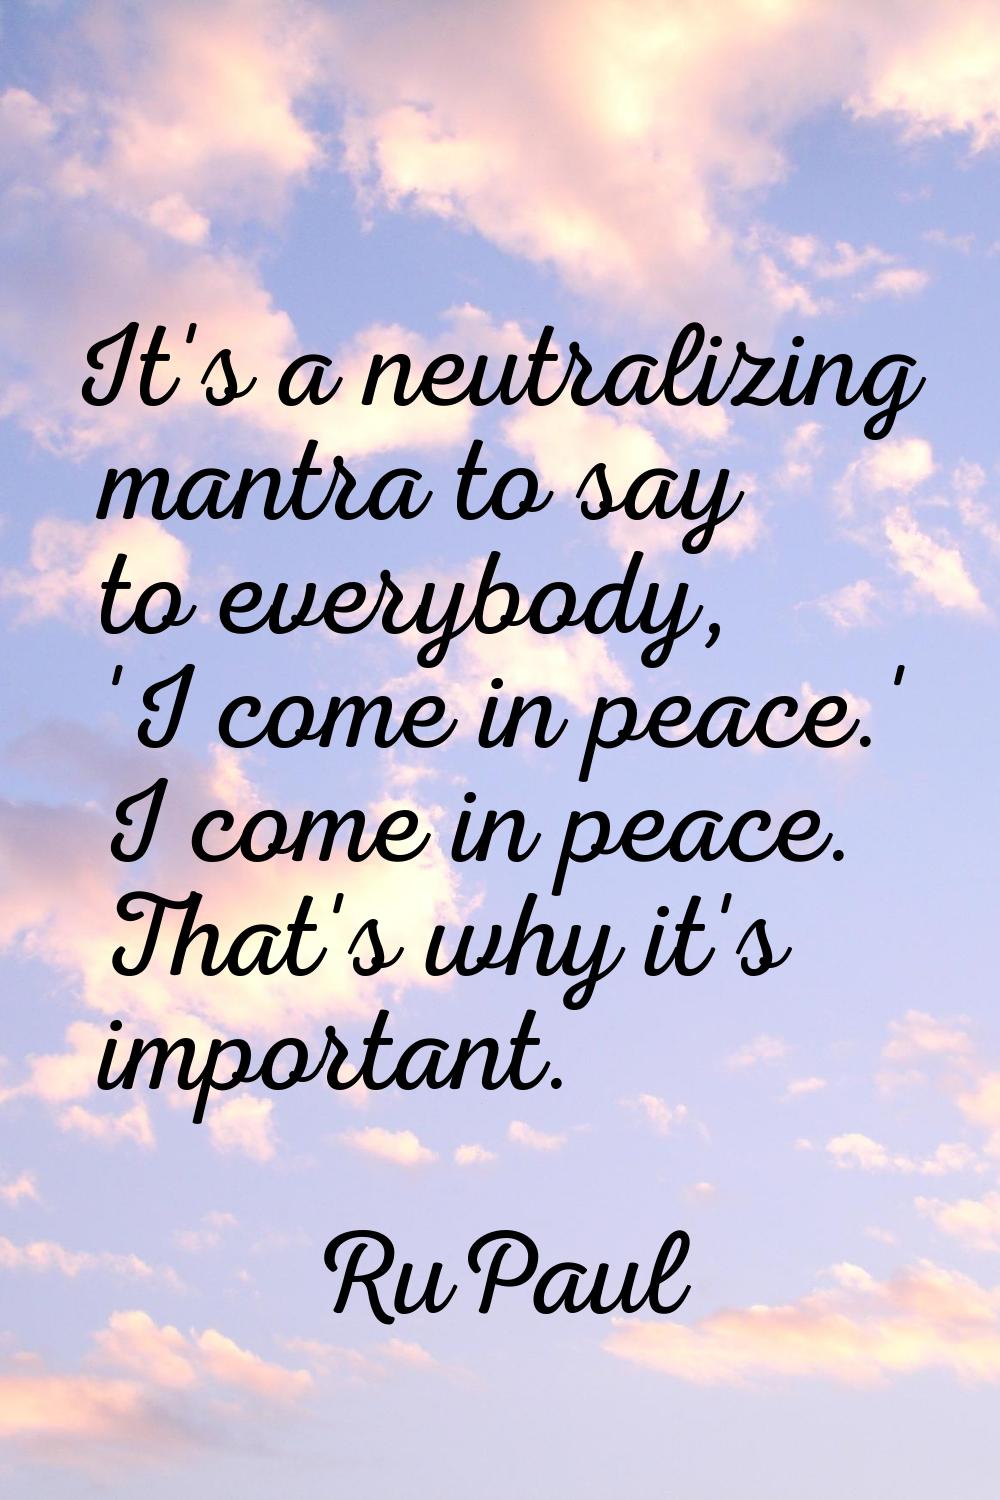 It's a neutralizing mantra to say to everybody, 'I come in peace.' I come in peace. That's why it's